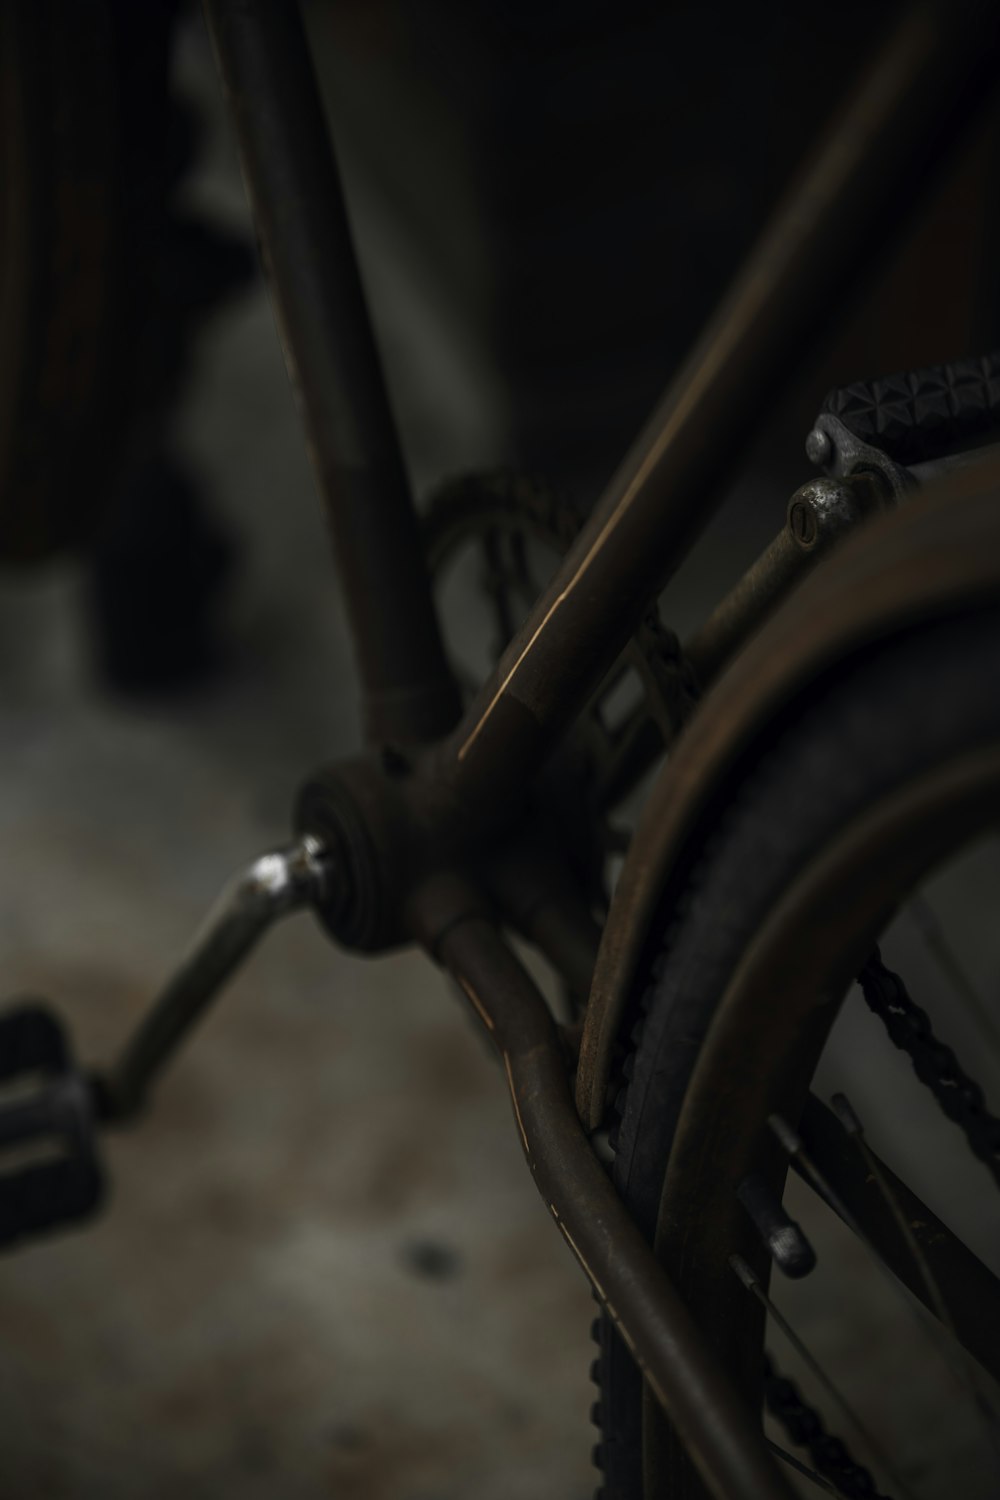 black bicycle wheel in close up photography